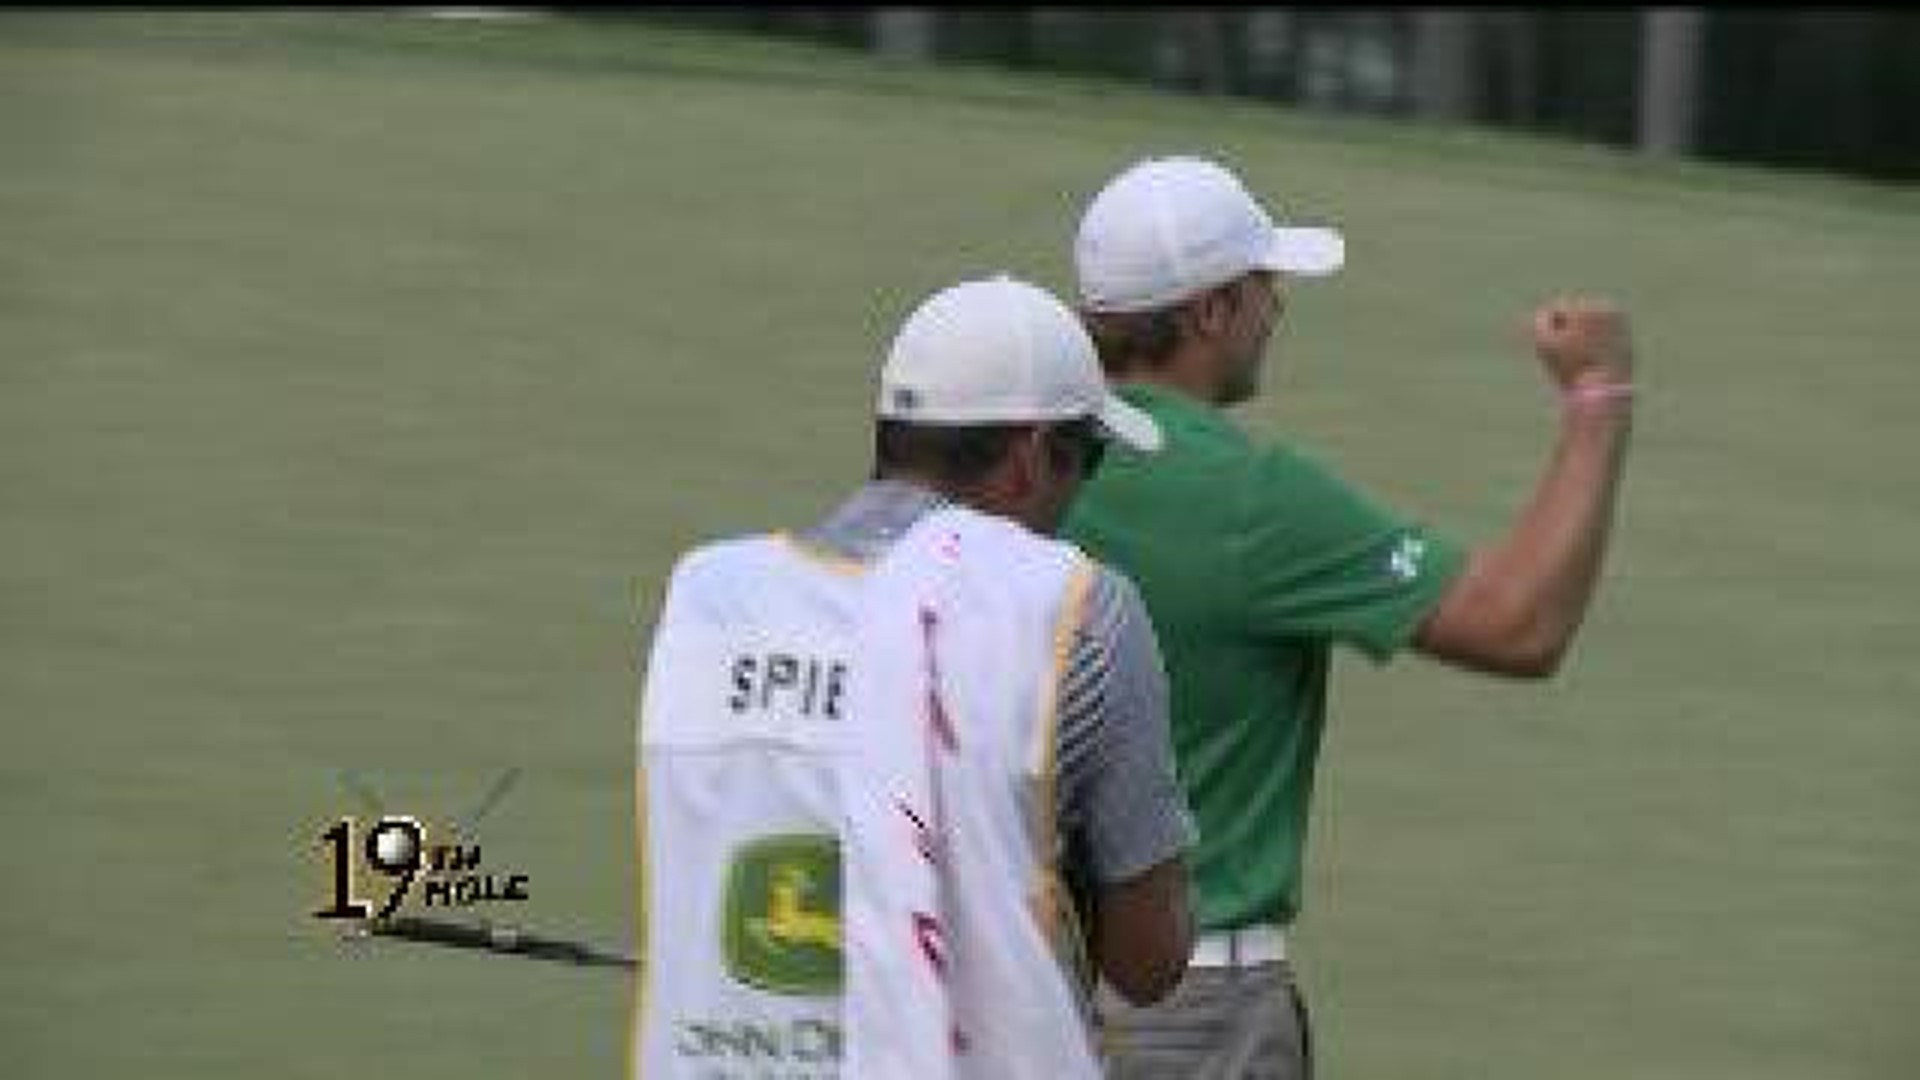 All the highlights of the John Deere Classic 2013 in 4 minutes